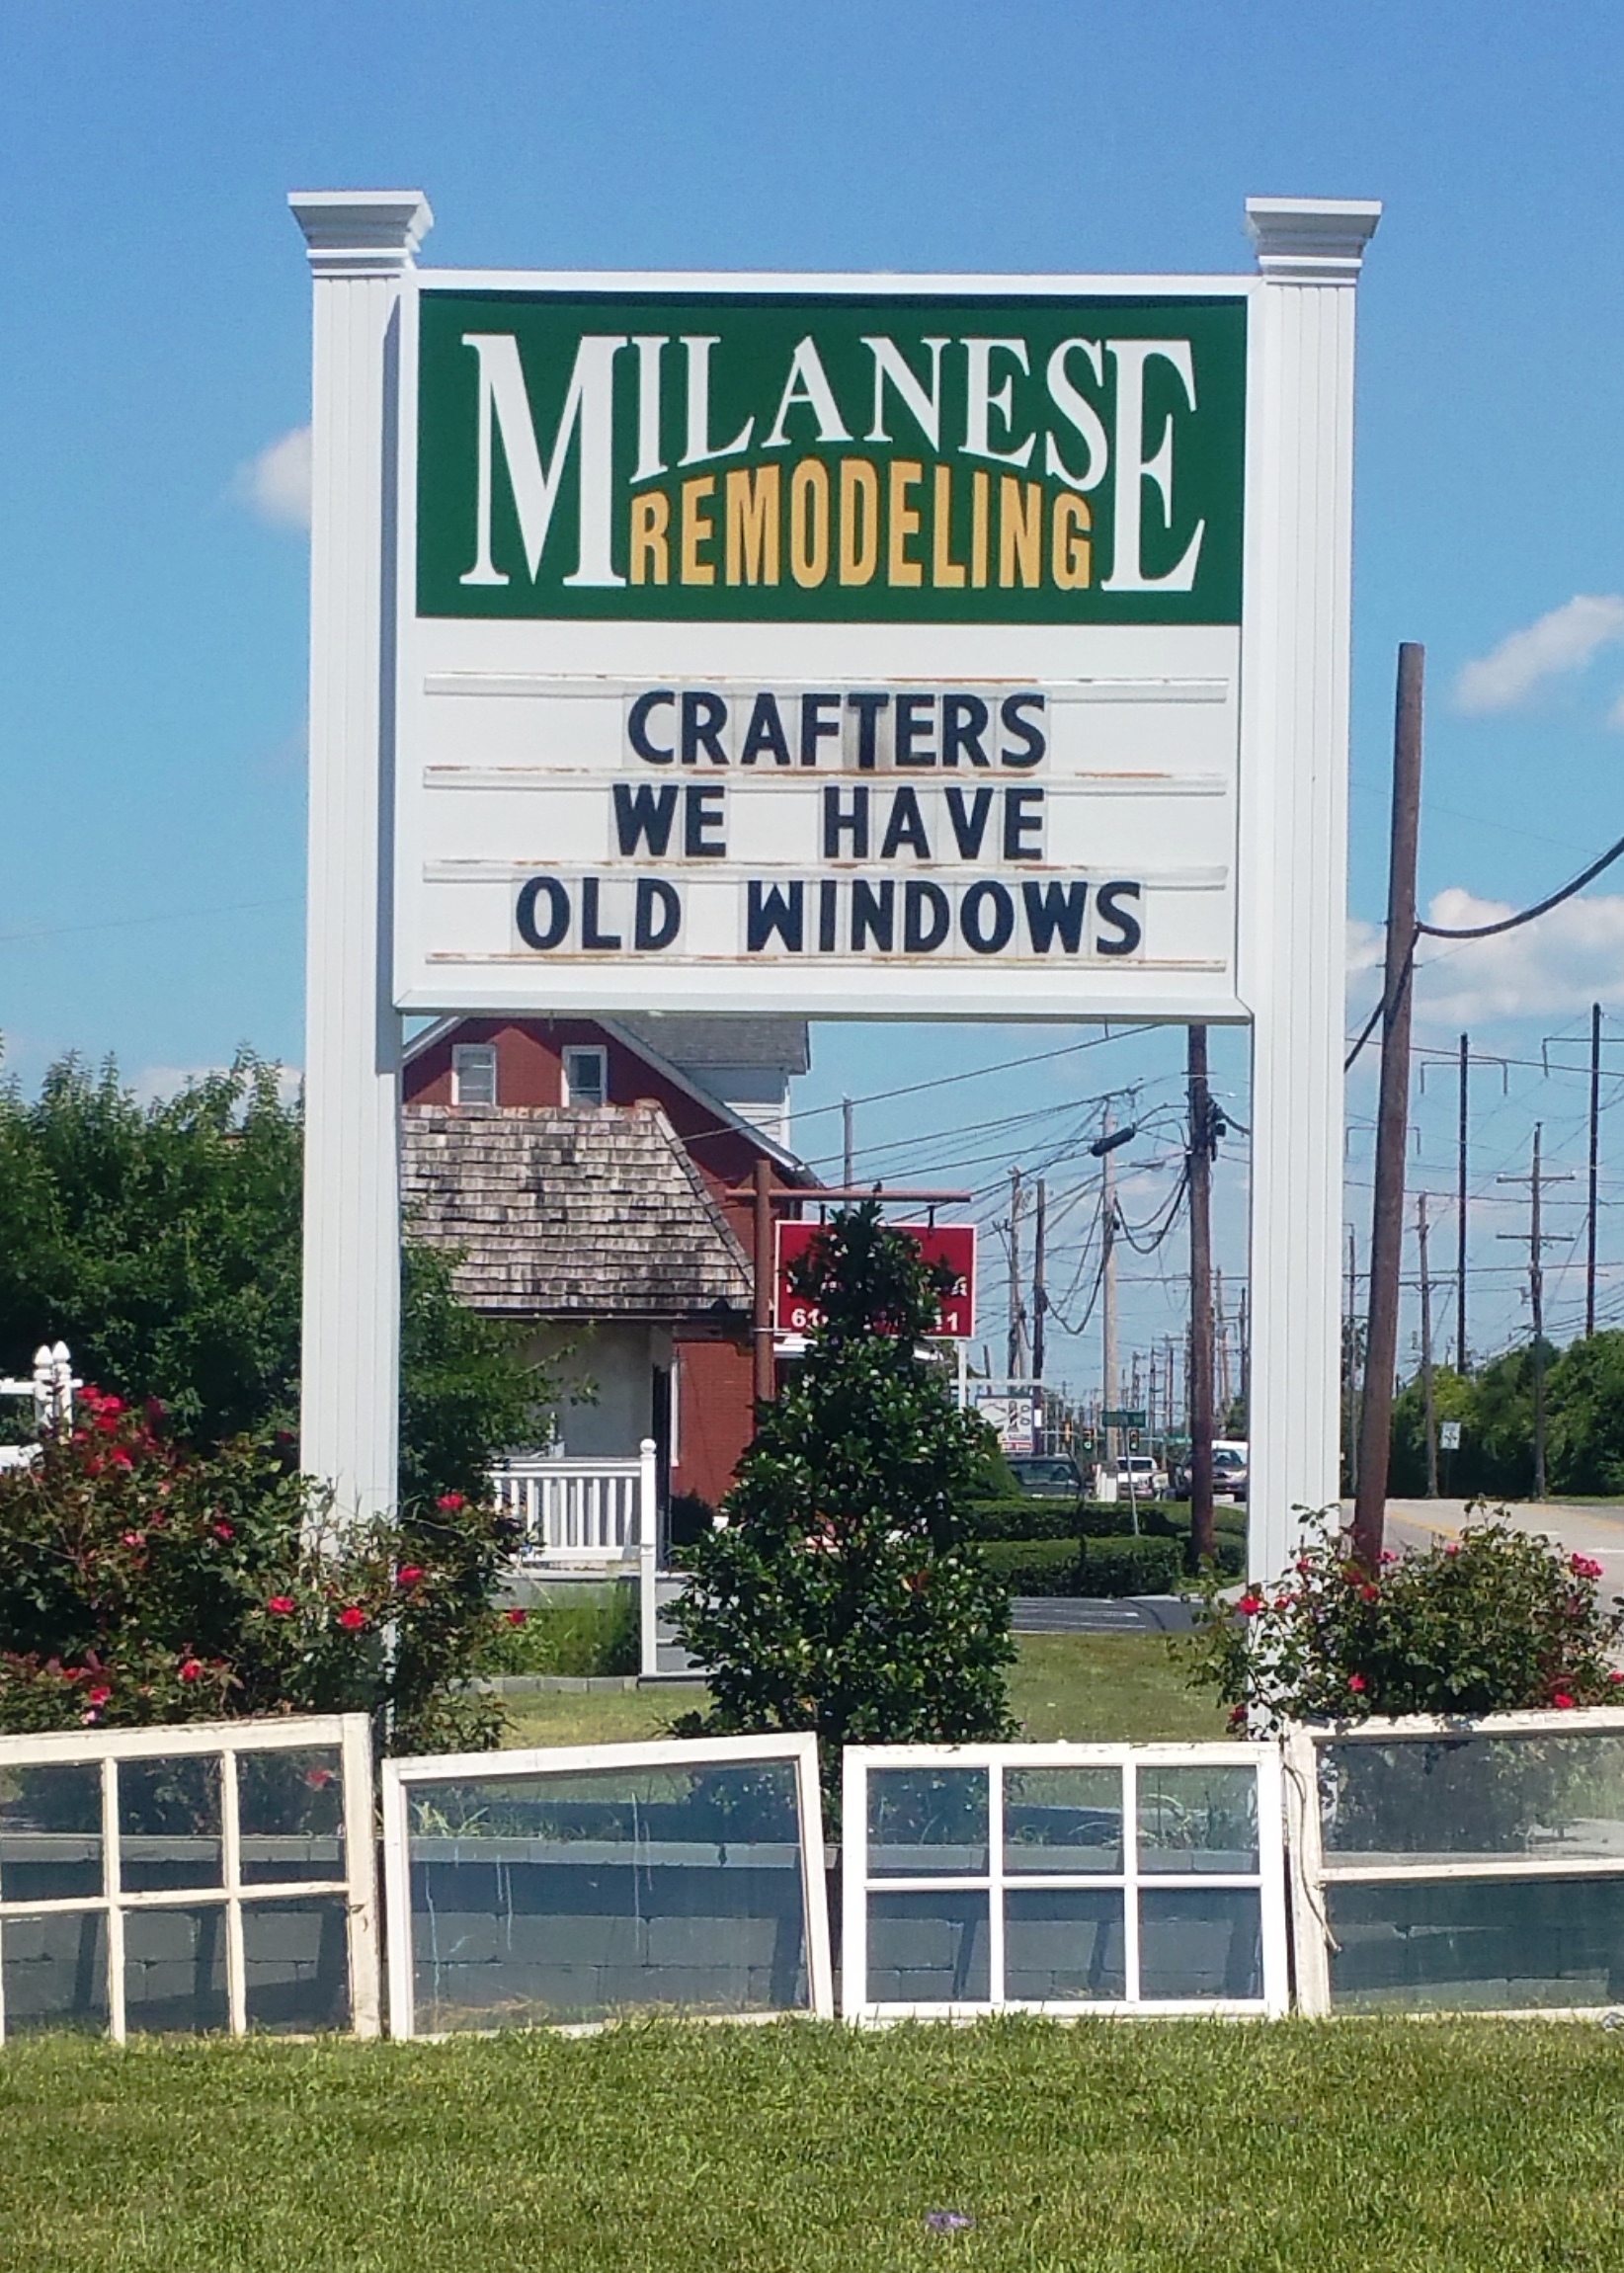 Where can I get old windows for craft projects?